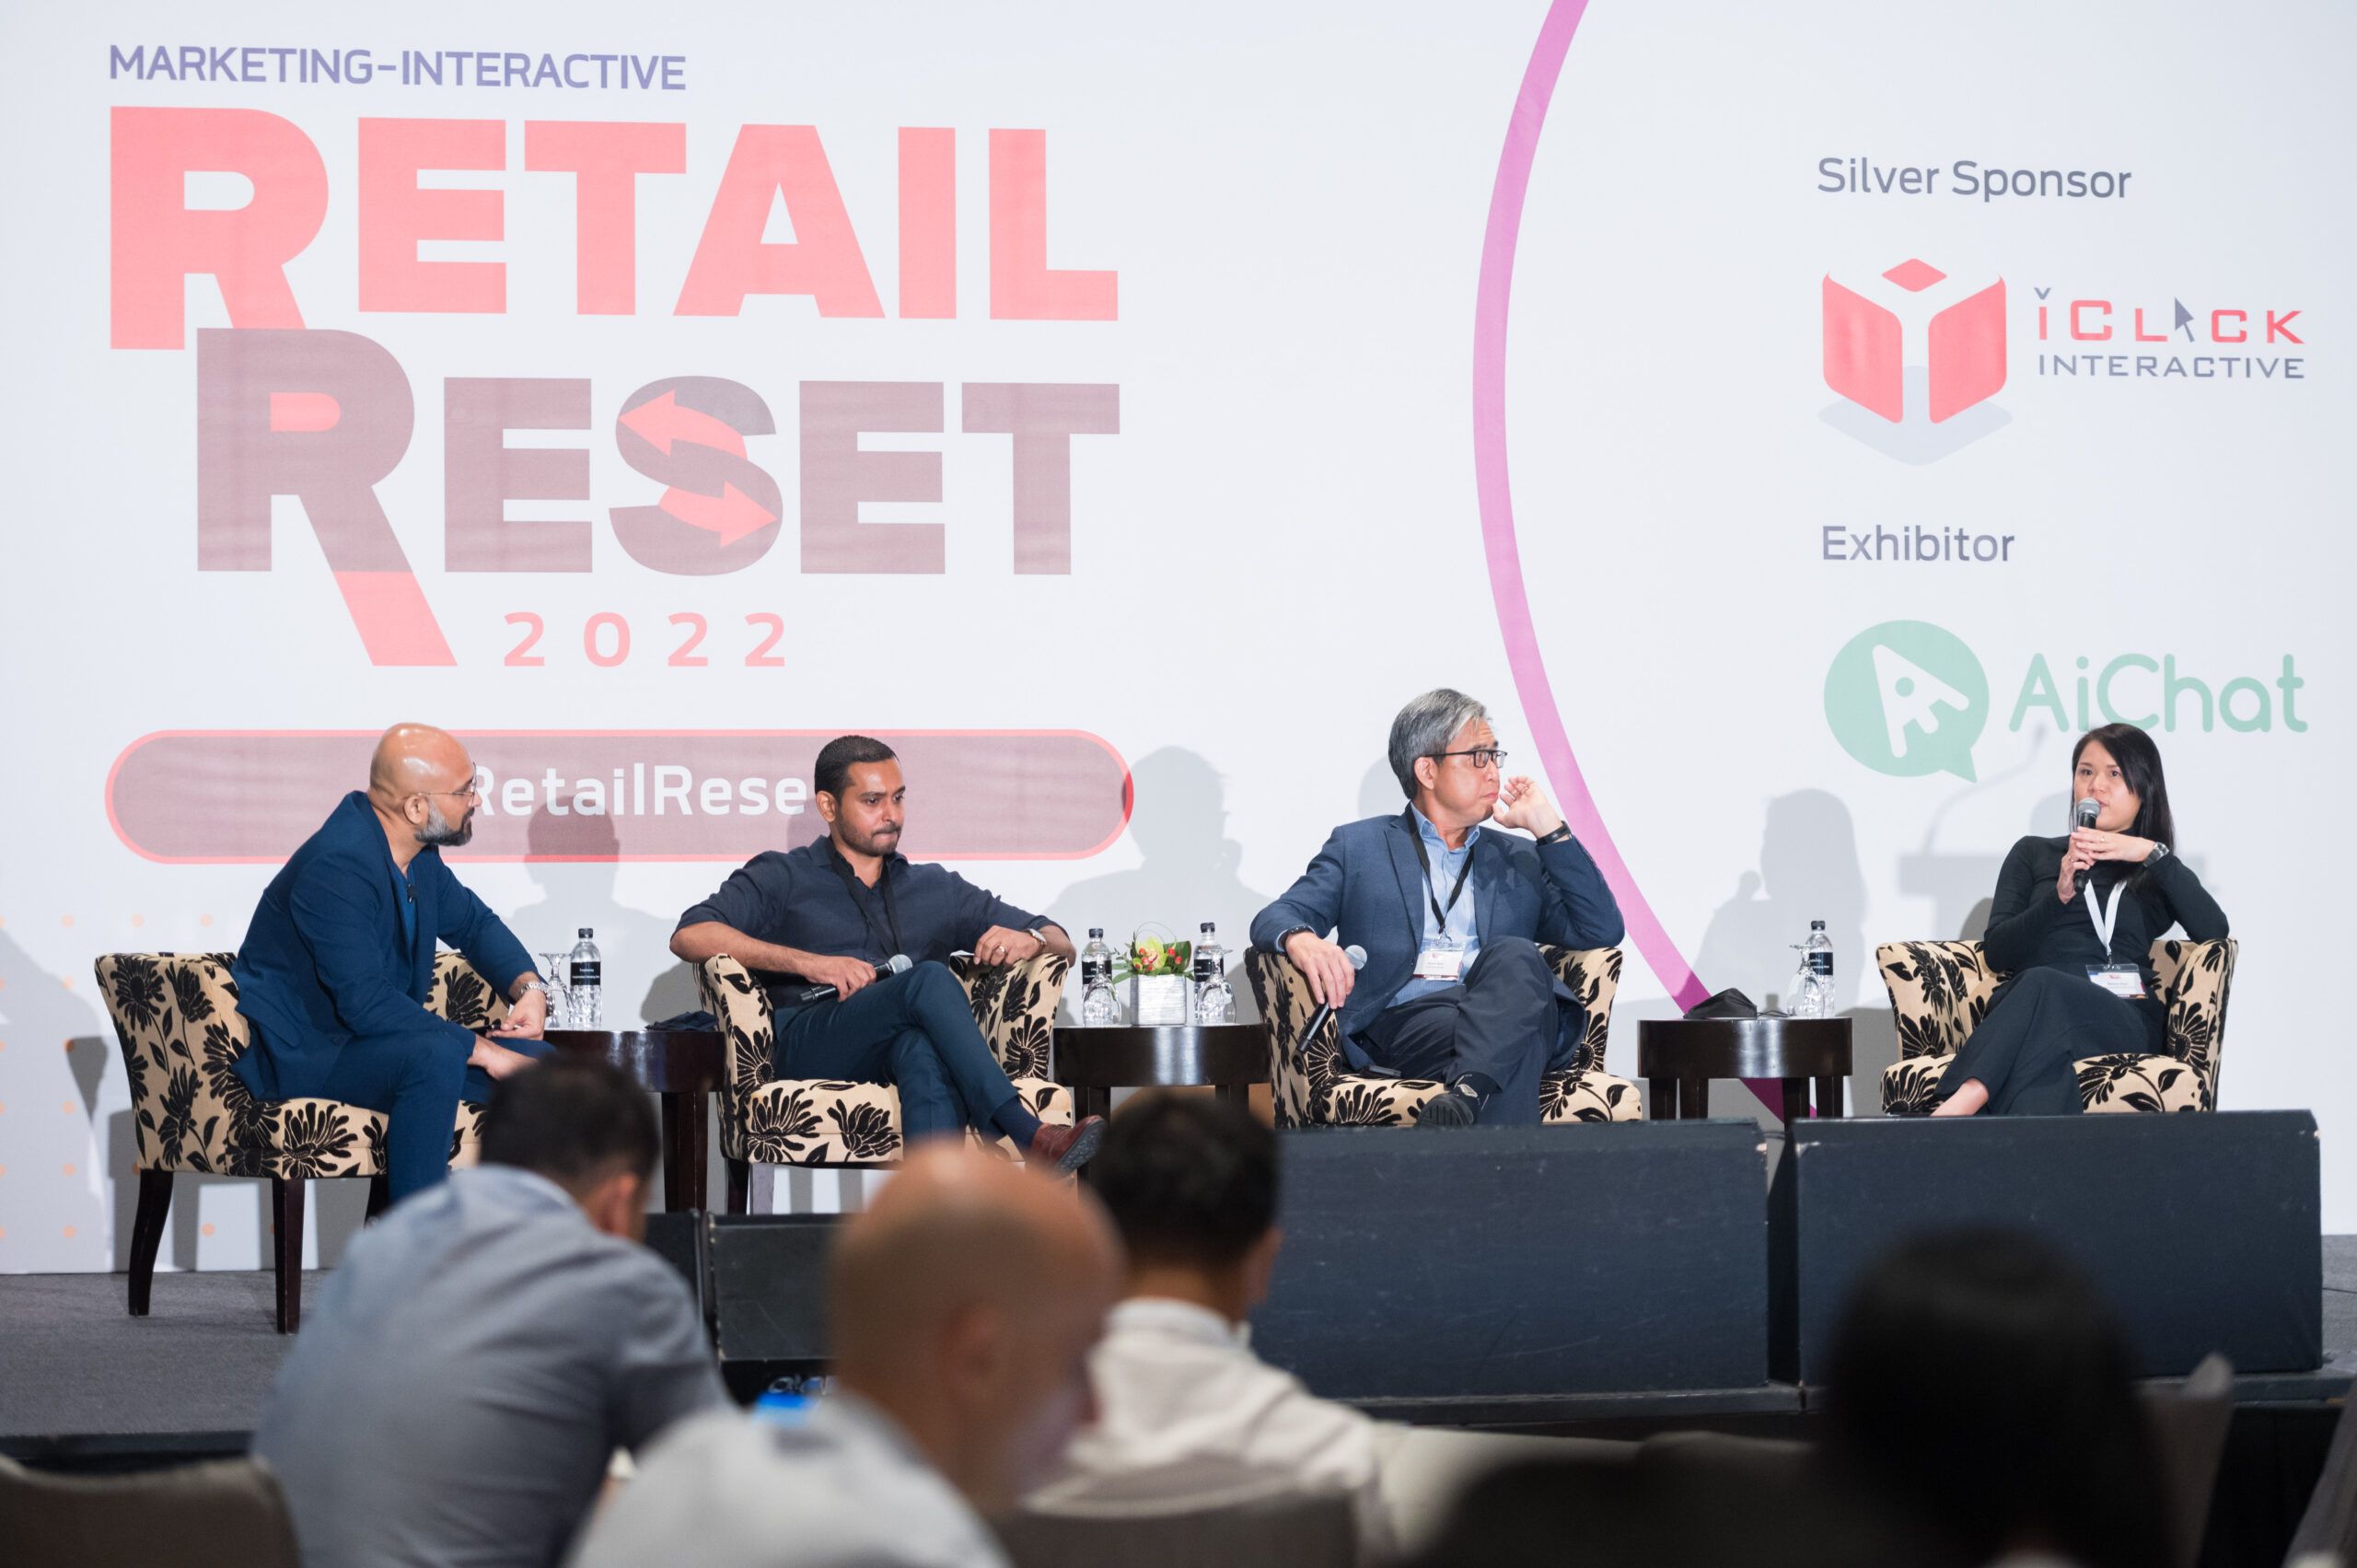 [Retail Reset 2022] Physical Store is Not Dead: Leaders Exchange on the Purpose of a Store Today